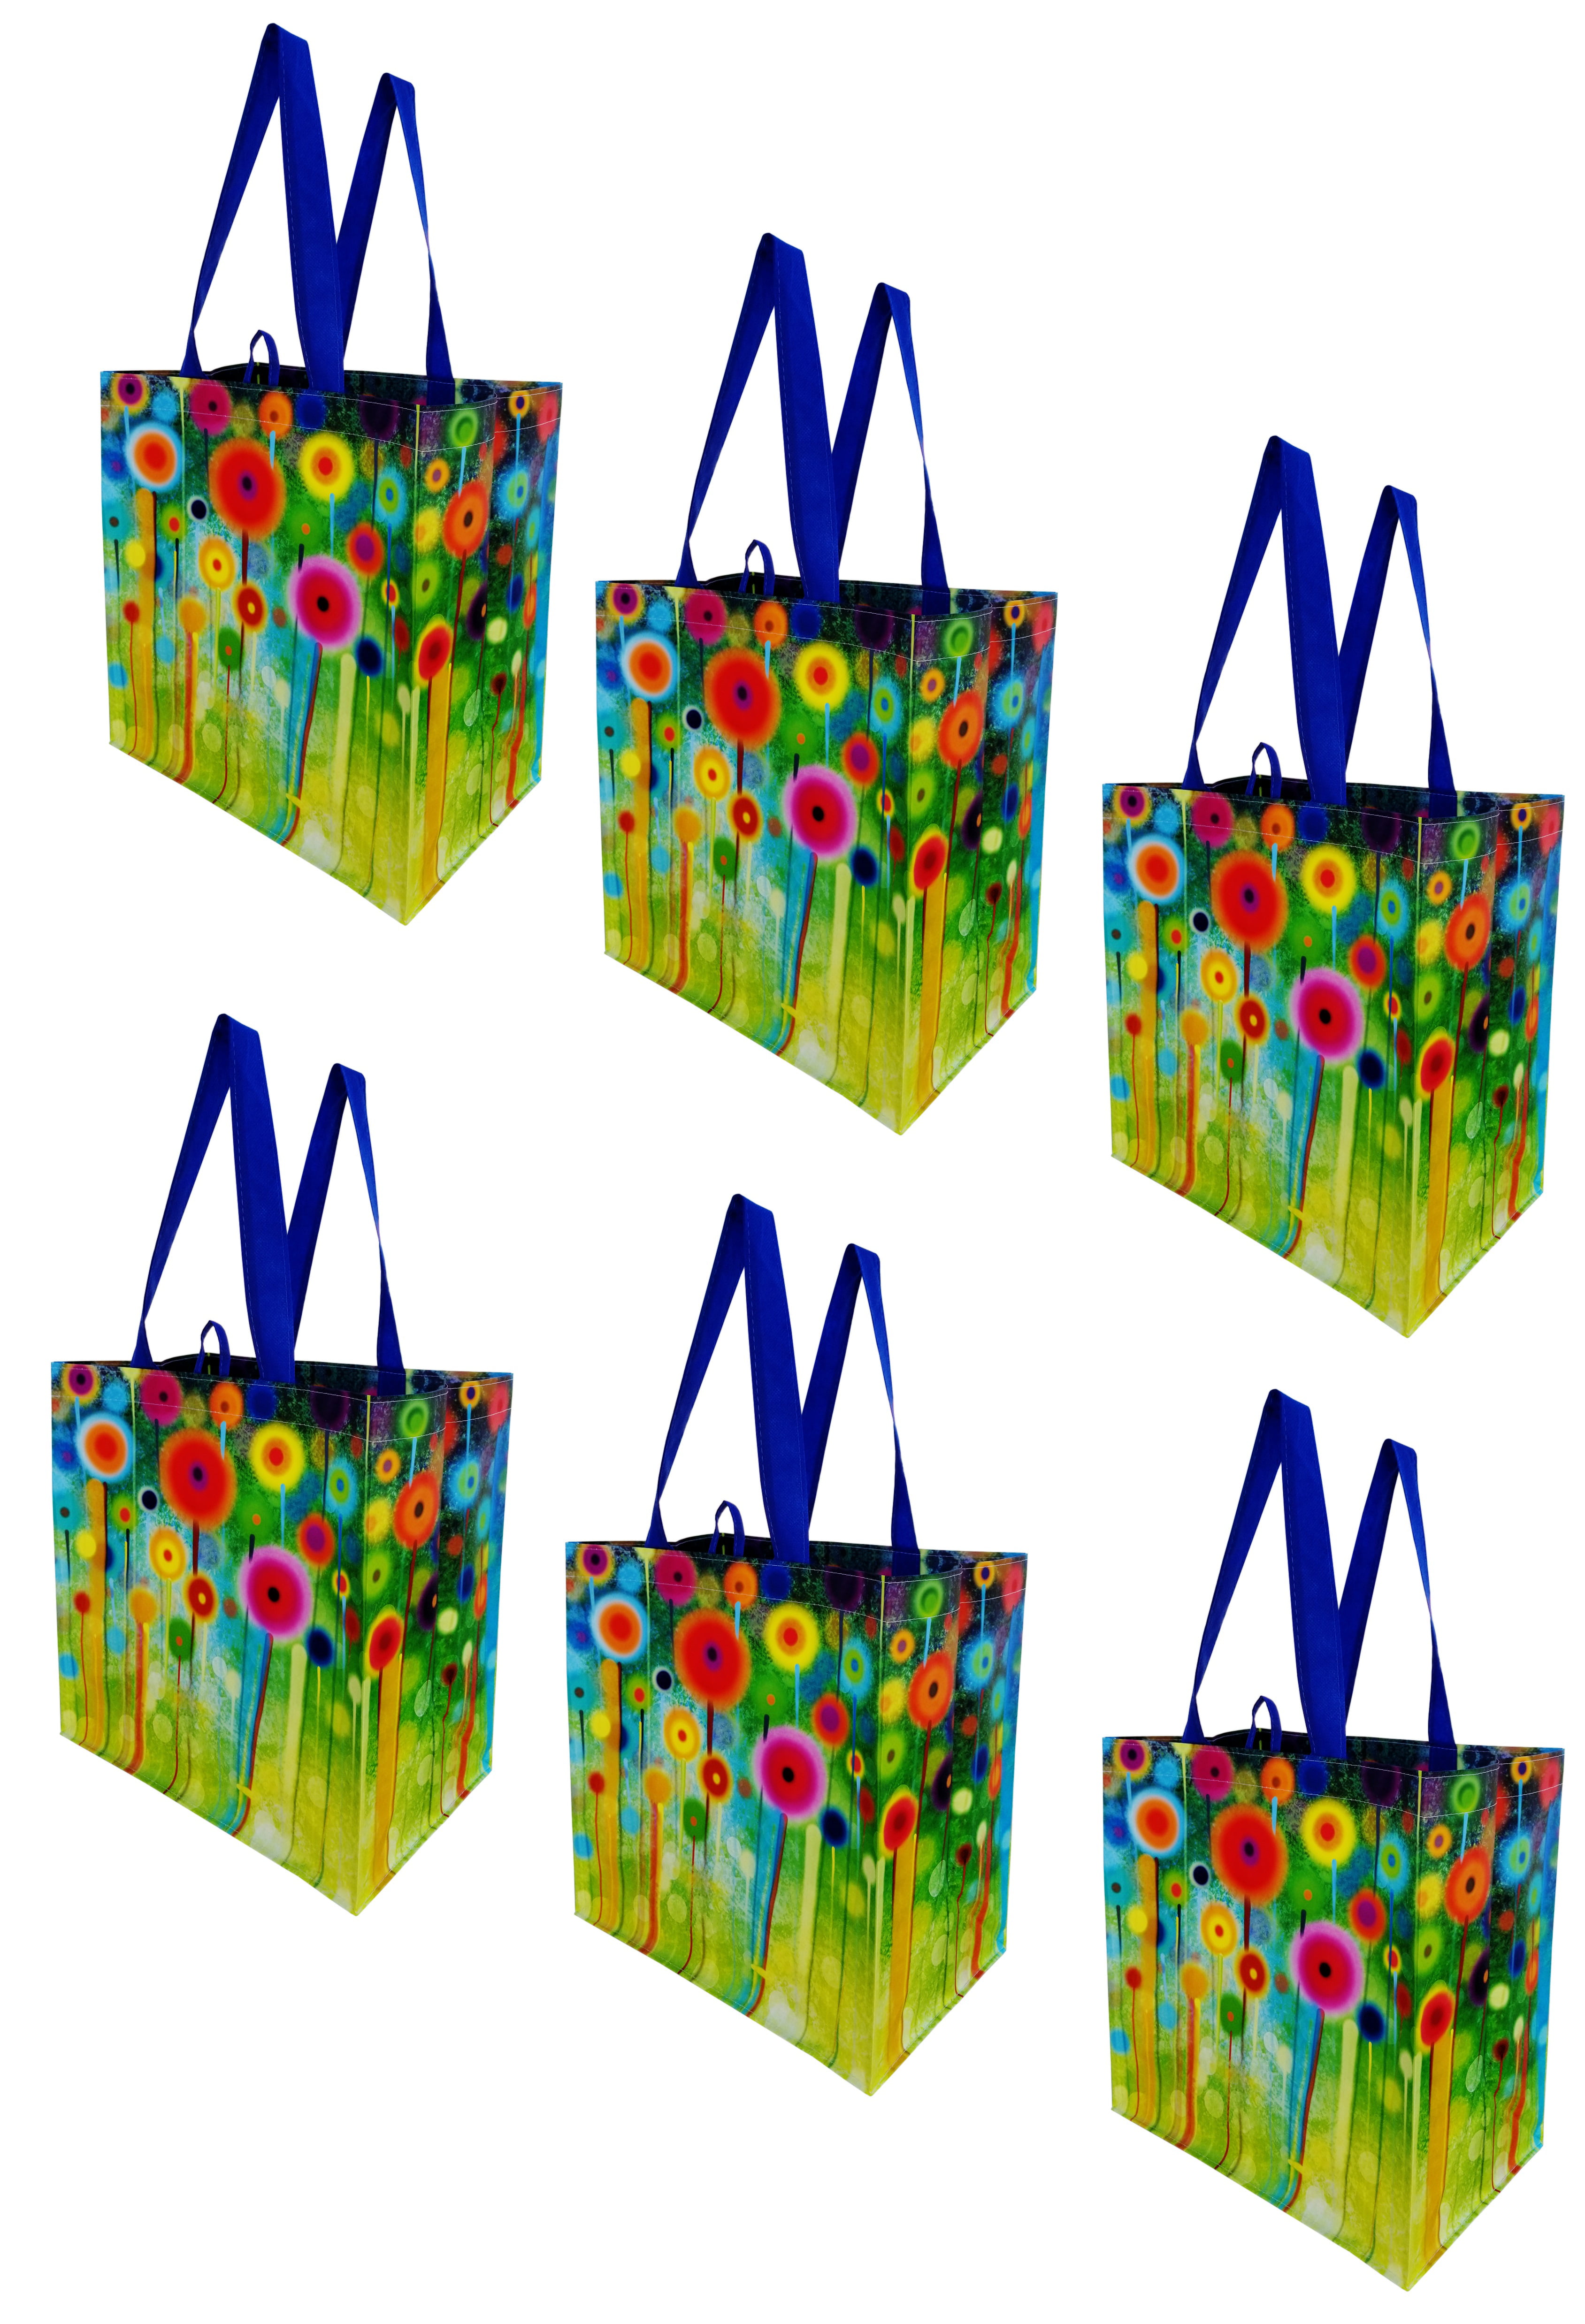 6 pcs Earthwise Reusable Grocery Shopping Totes w/Chalkboard Veggies Design 